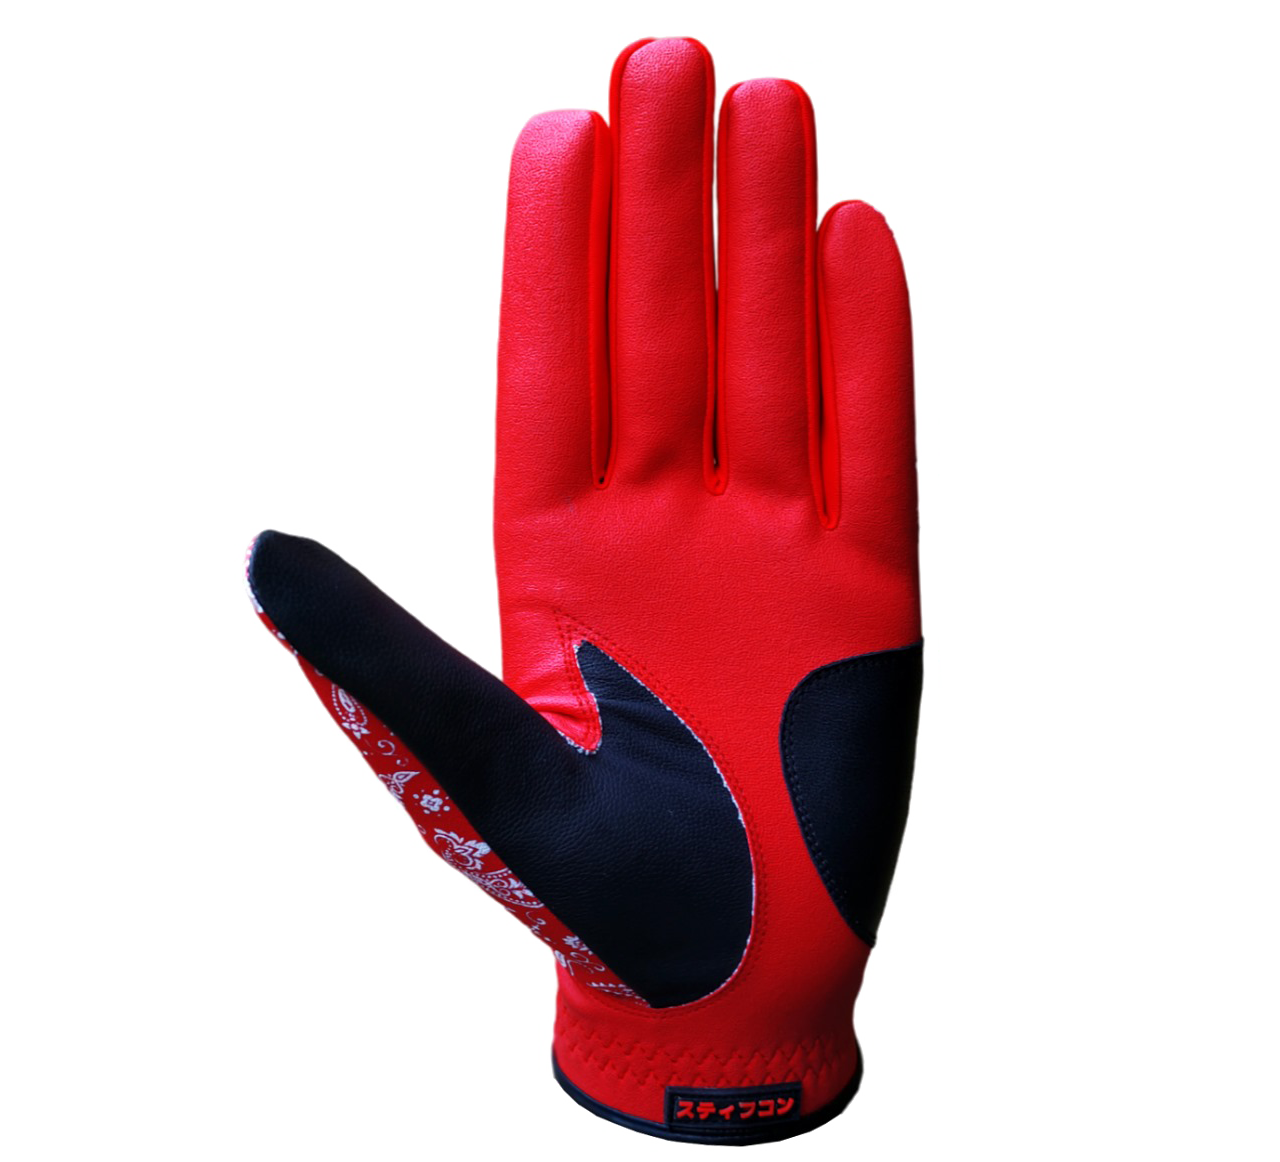 FLUO PAISLEY RED Men's Red Golf Gloves FLUO_Paisley Red V5